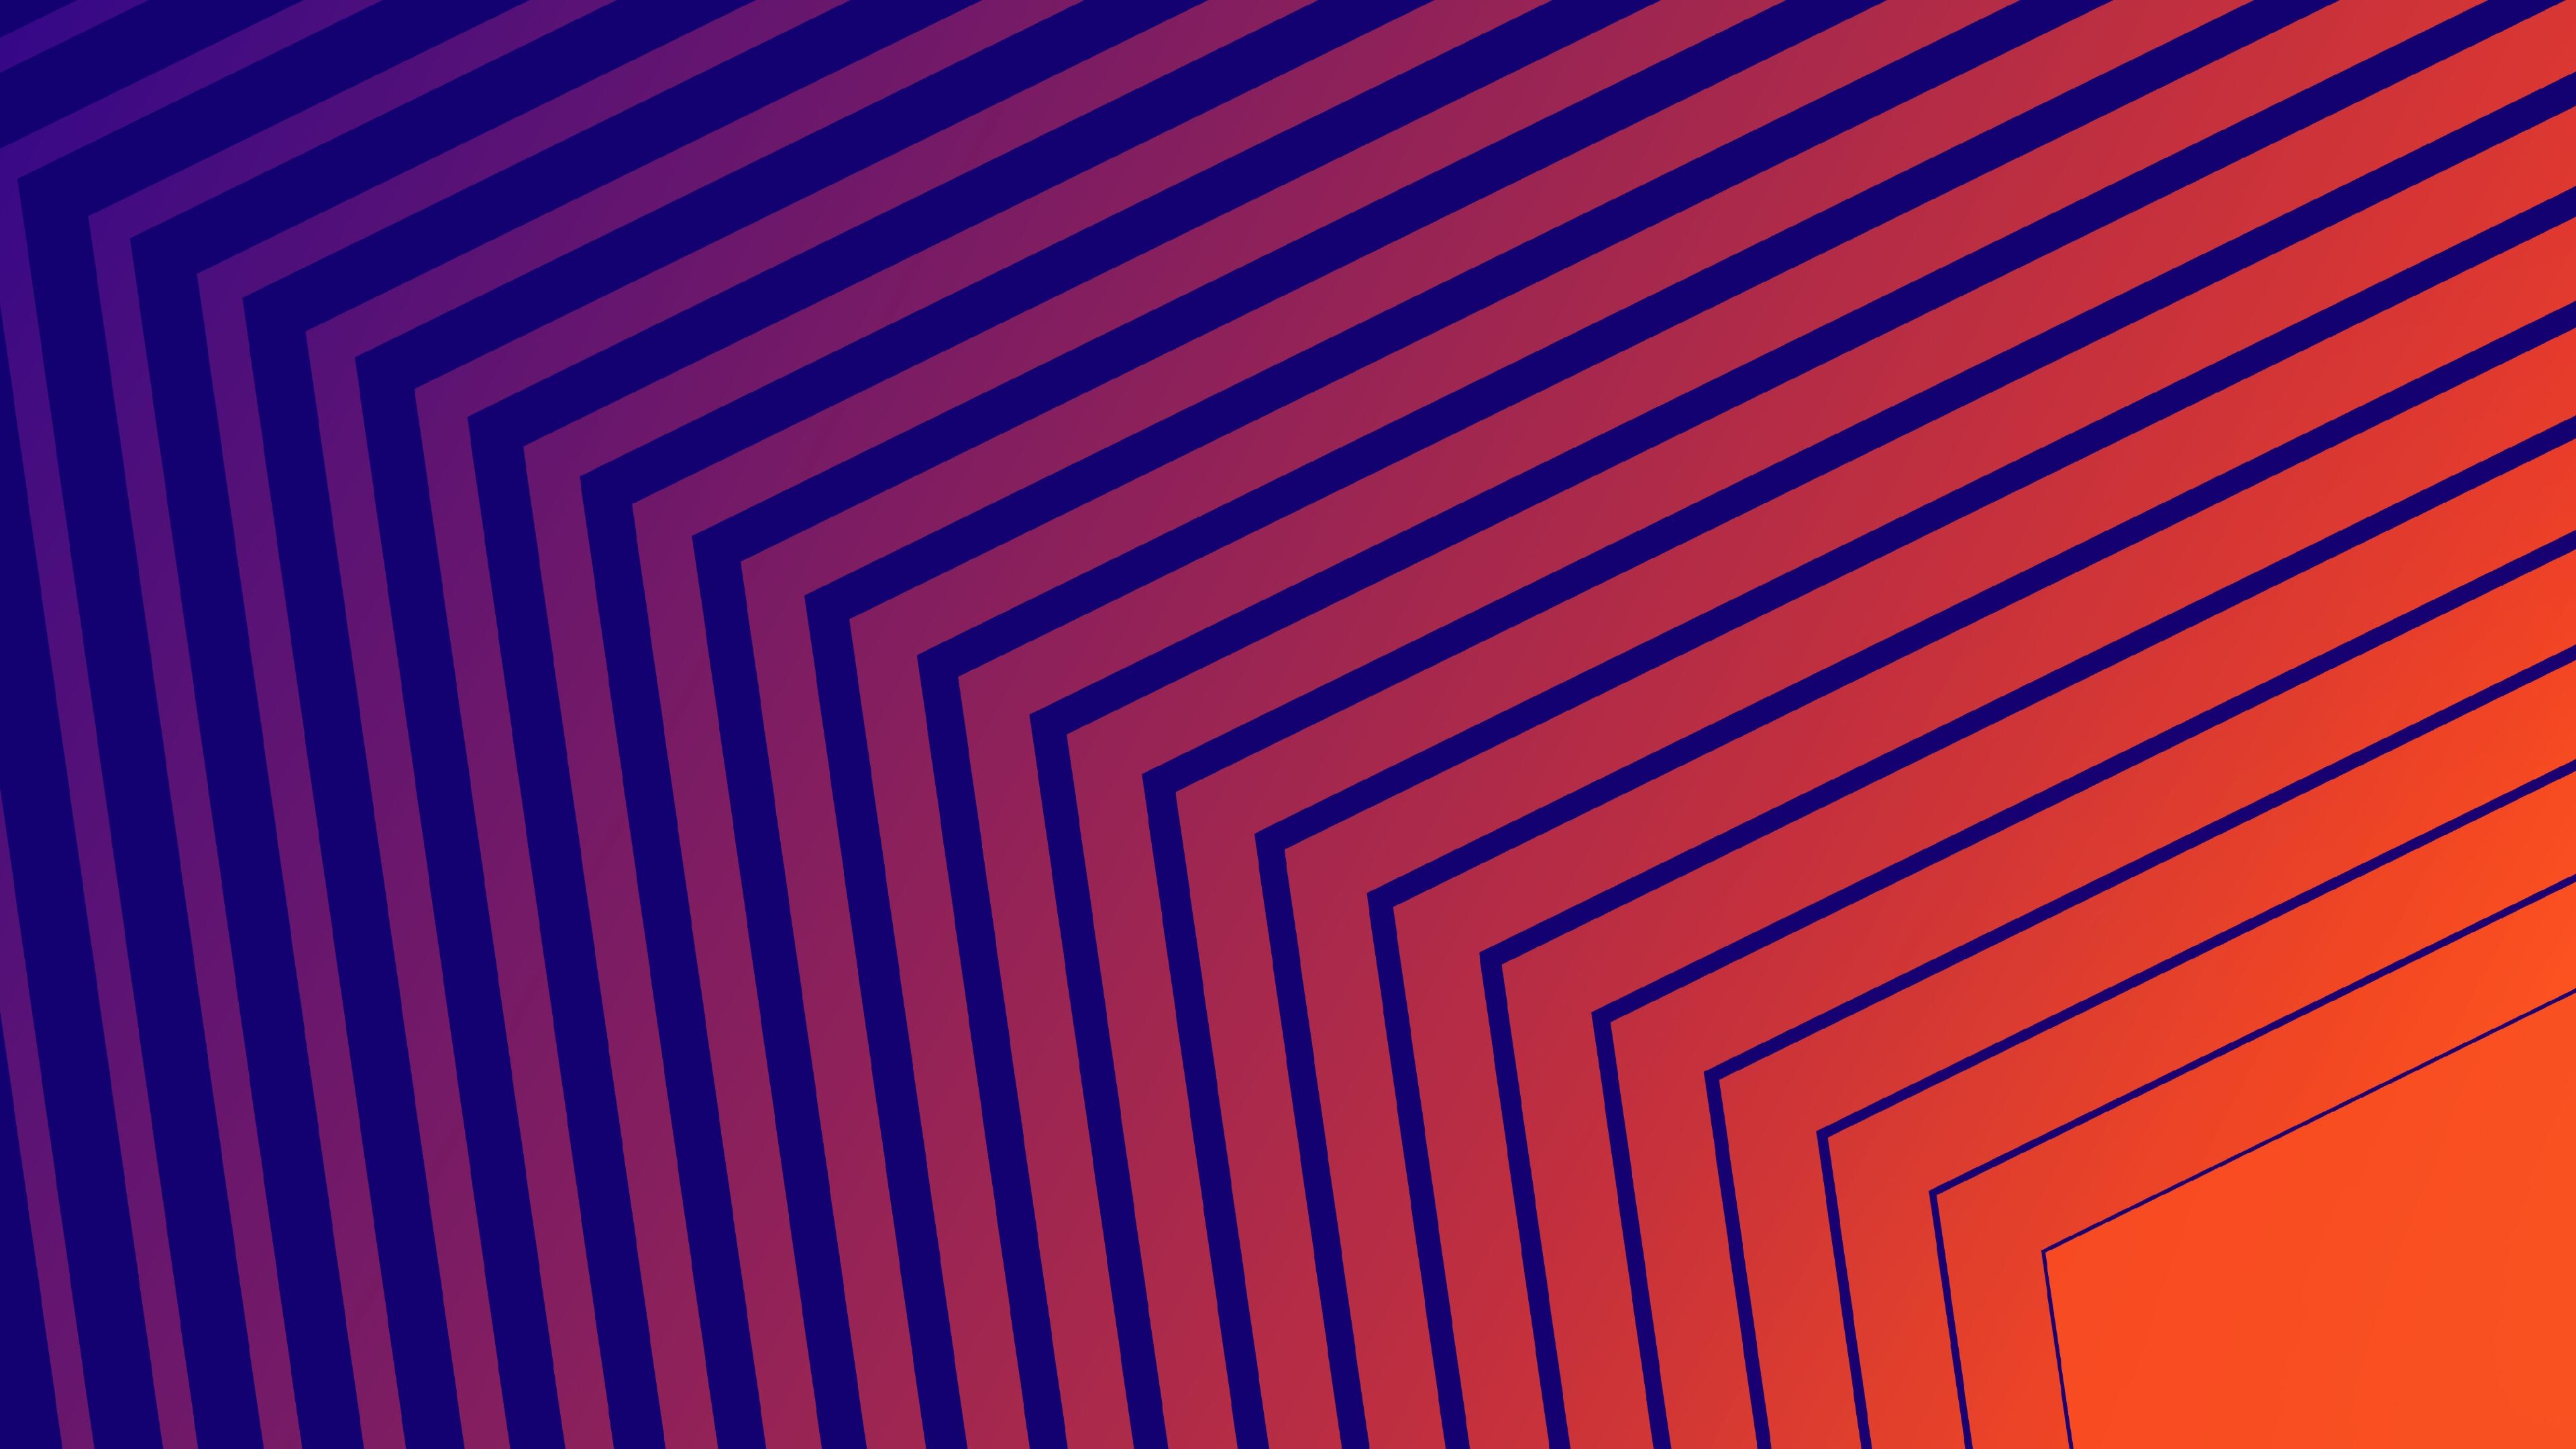 Geometric Abstract: Obtuse angles, Optic illusion, Gradient, Parallel lines. 3840x2160 4K Background.